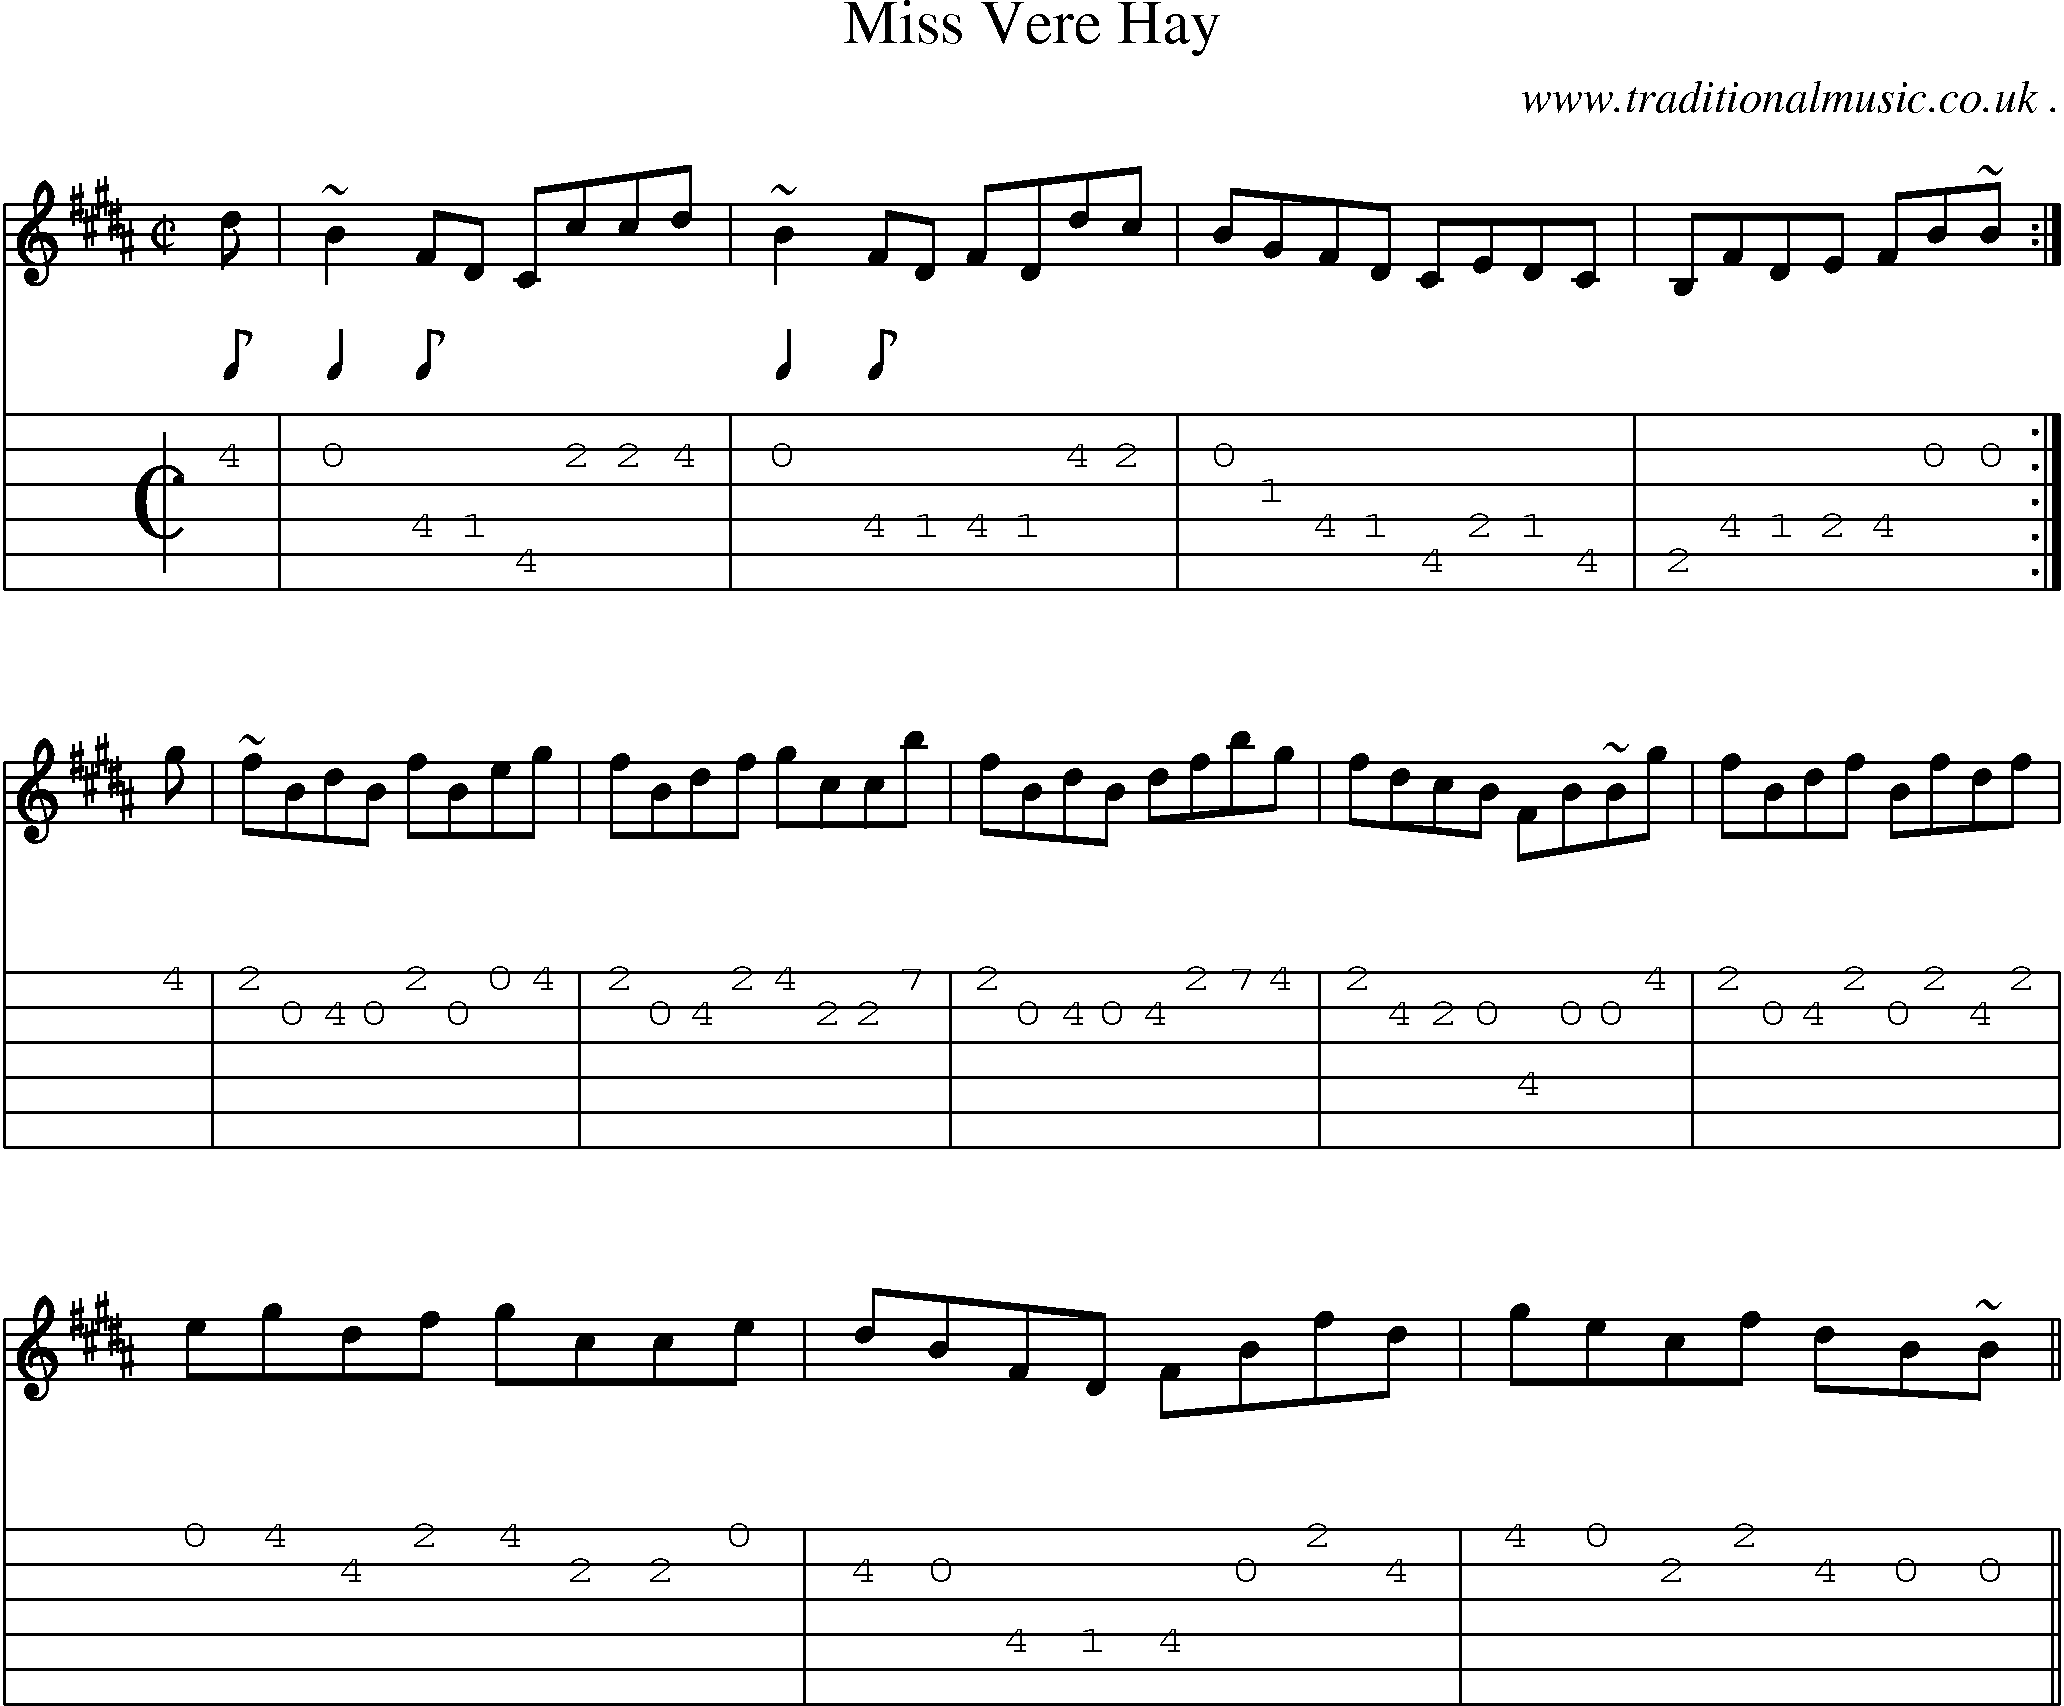 Sheet-music  score, Chords and Guitar Tabs for Miss Vere Hay